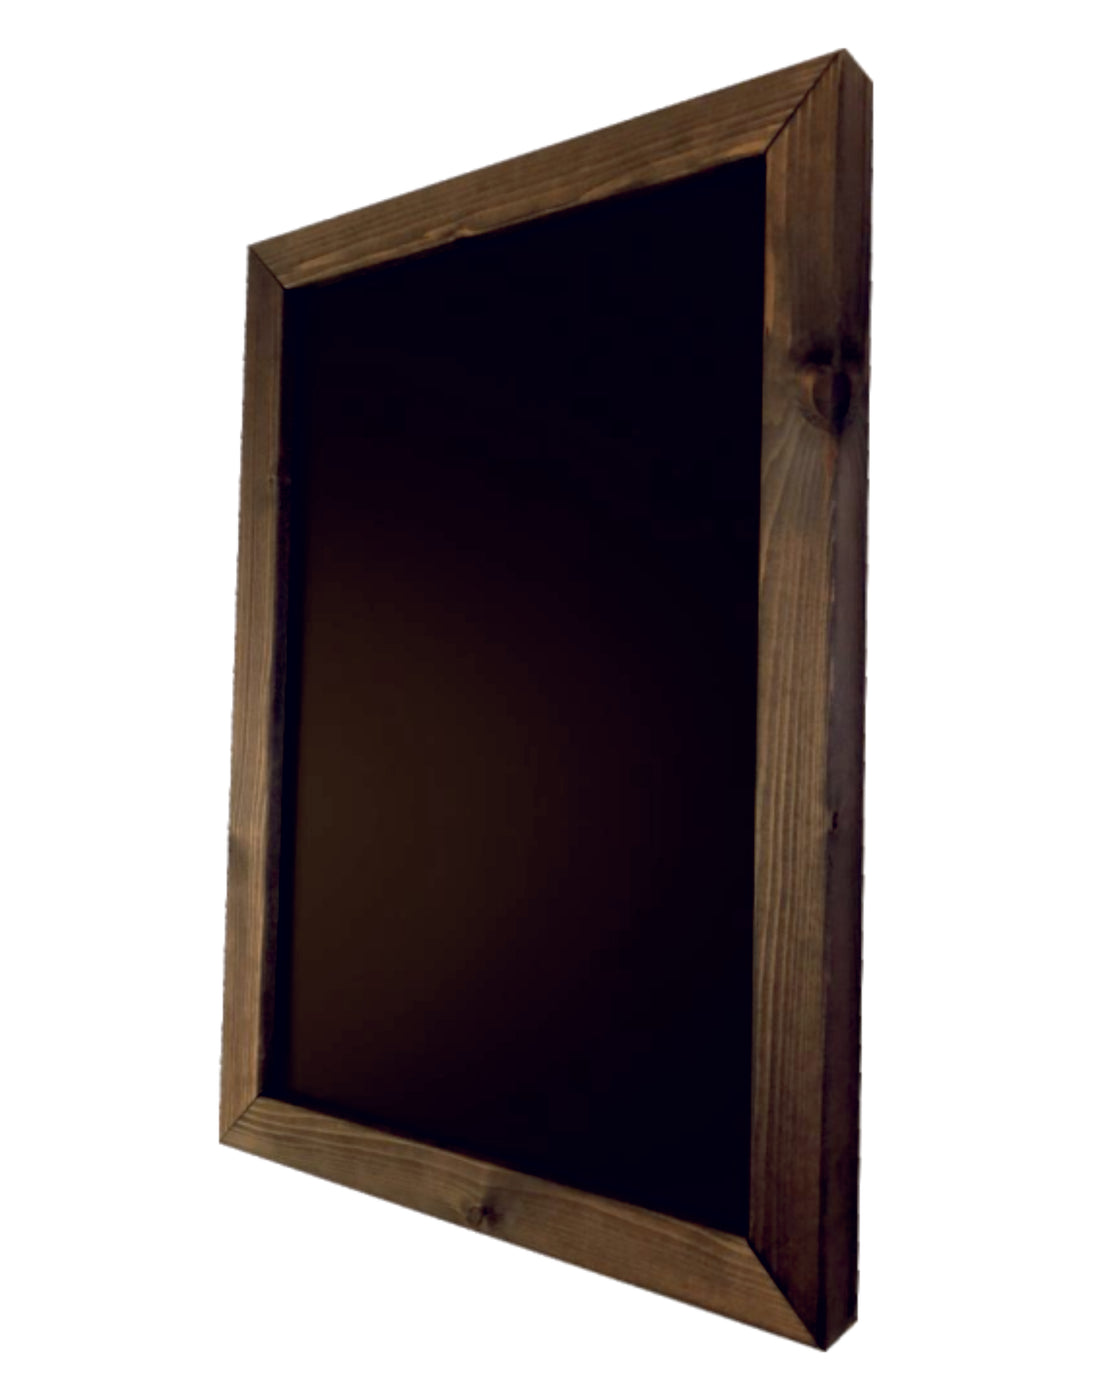 Chalkboards: The Benefits and Drawbacks of Traditional Classroom Tools